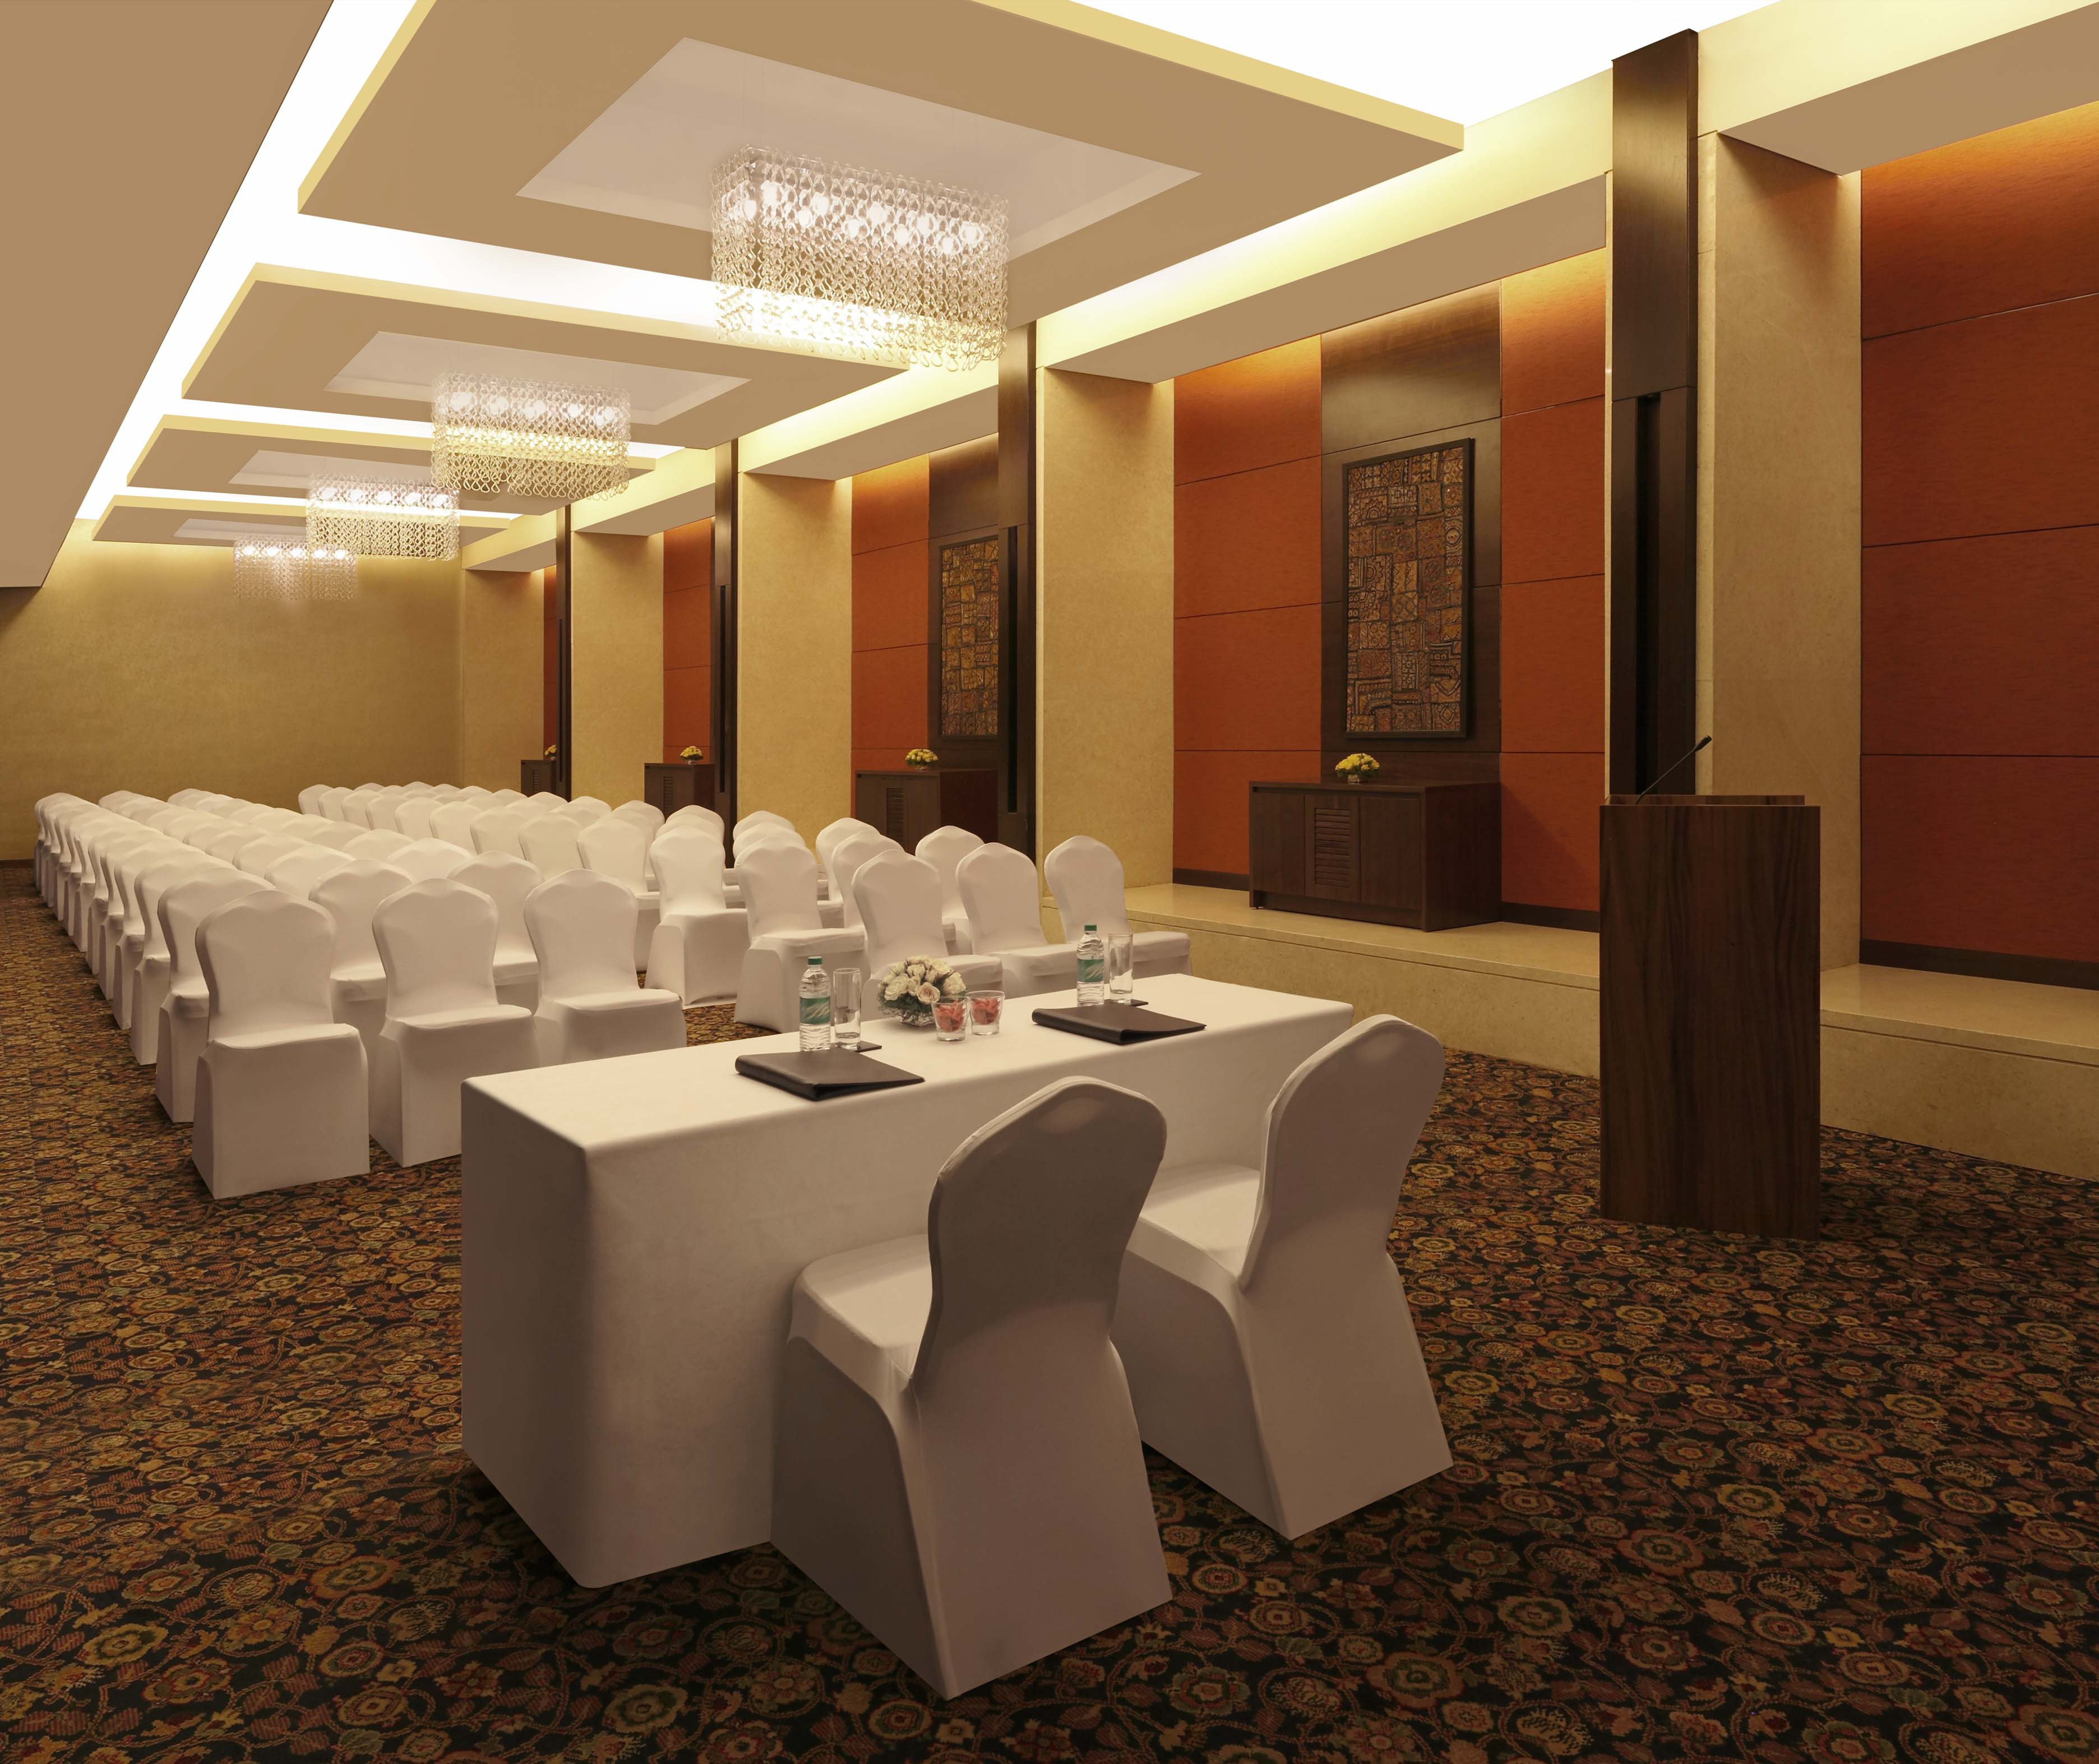 Vihara Meeting Room Arranged Theater Style With Rows of White Chairs Facing White Table With Two White Chairs and Podium